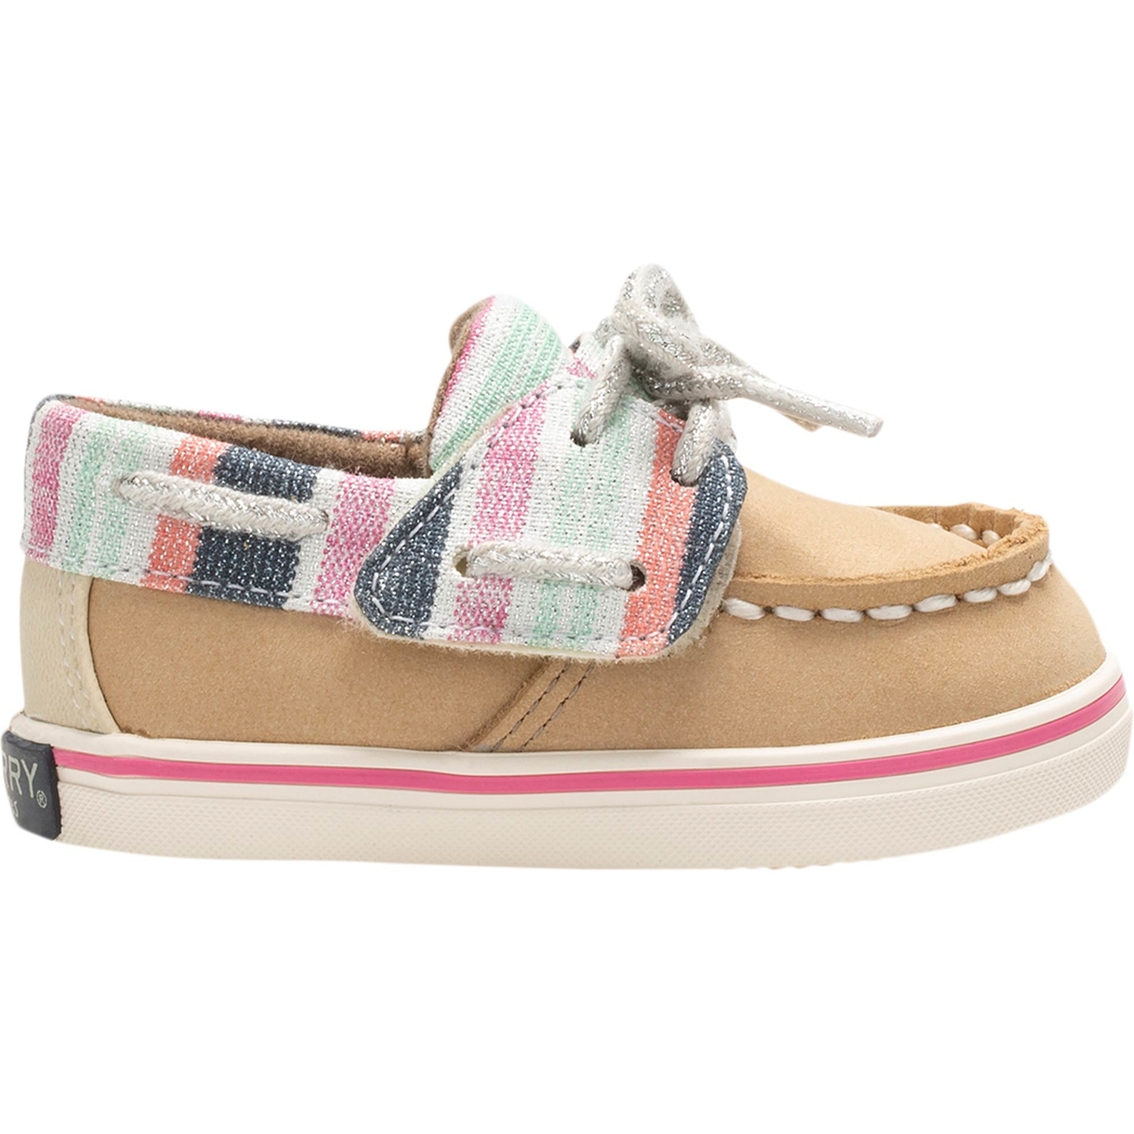 Sperry Infant Girls Intrepid Jr. Crib Shoes | Casual | Shoes | Shop The ...